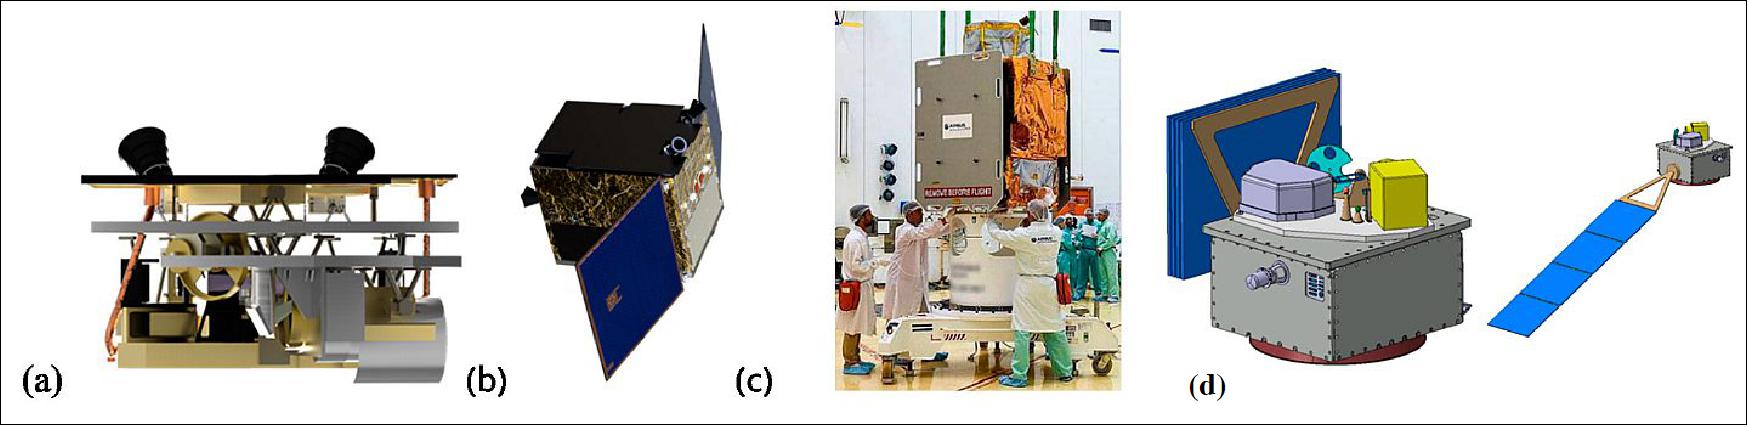 Figure 16: Images of possible platforms and payload integration: (a) payload integrated on SSTL Formosat-7 platform, (b) Formosat-7 candidate platform, (c) PeruSat-1 on Airbus-S (baseline platform for TRUTHS), (d) TRUTHS payload configured on Astrobus-S (image credit: TRUTHS collaborotion)